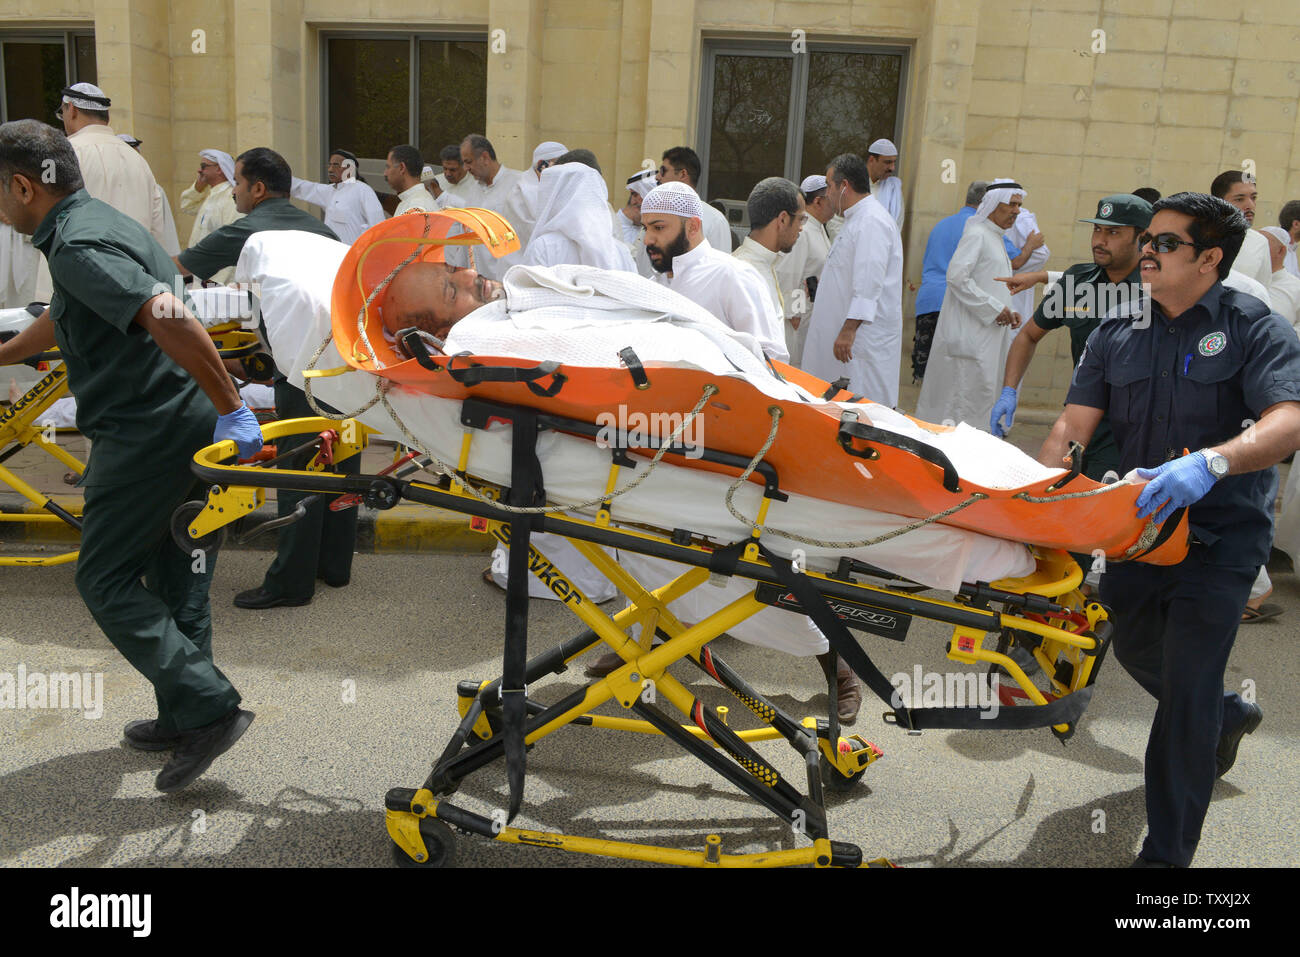 Kuwaitis help a wounded man at the Imam Sadiq Mosque after a deadly explosion claimed by the Islamic State group during Friday prayers in Kuwait City, Friday, June 26, 2015. At least 25 people have been killed and 202 others wounded when a suicide bomber targeted the Friday prayers at a Shia mosque in Kuwait City, Kuwaiti medical sources and human rights activists said. Photo by Raed Qutena/UPI Stock Photo